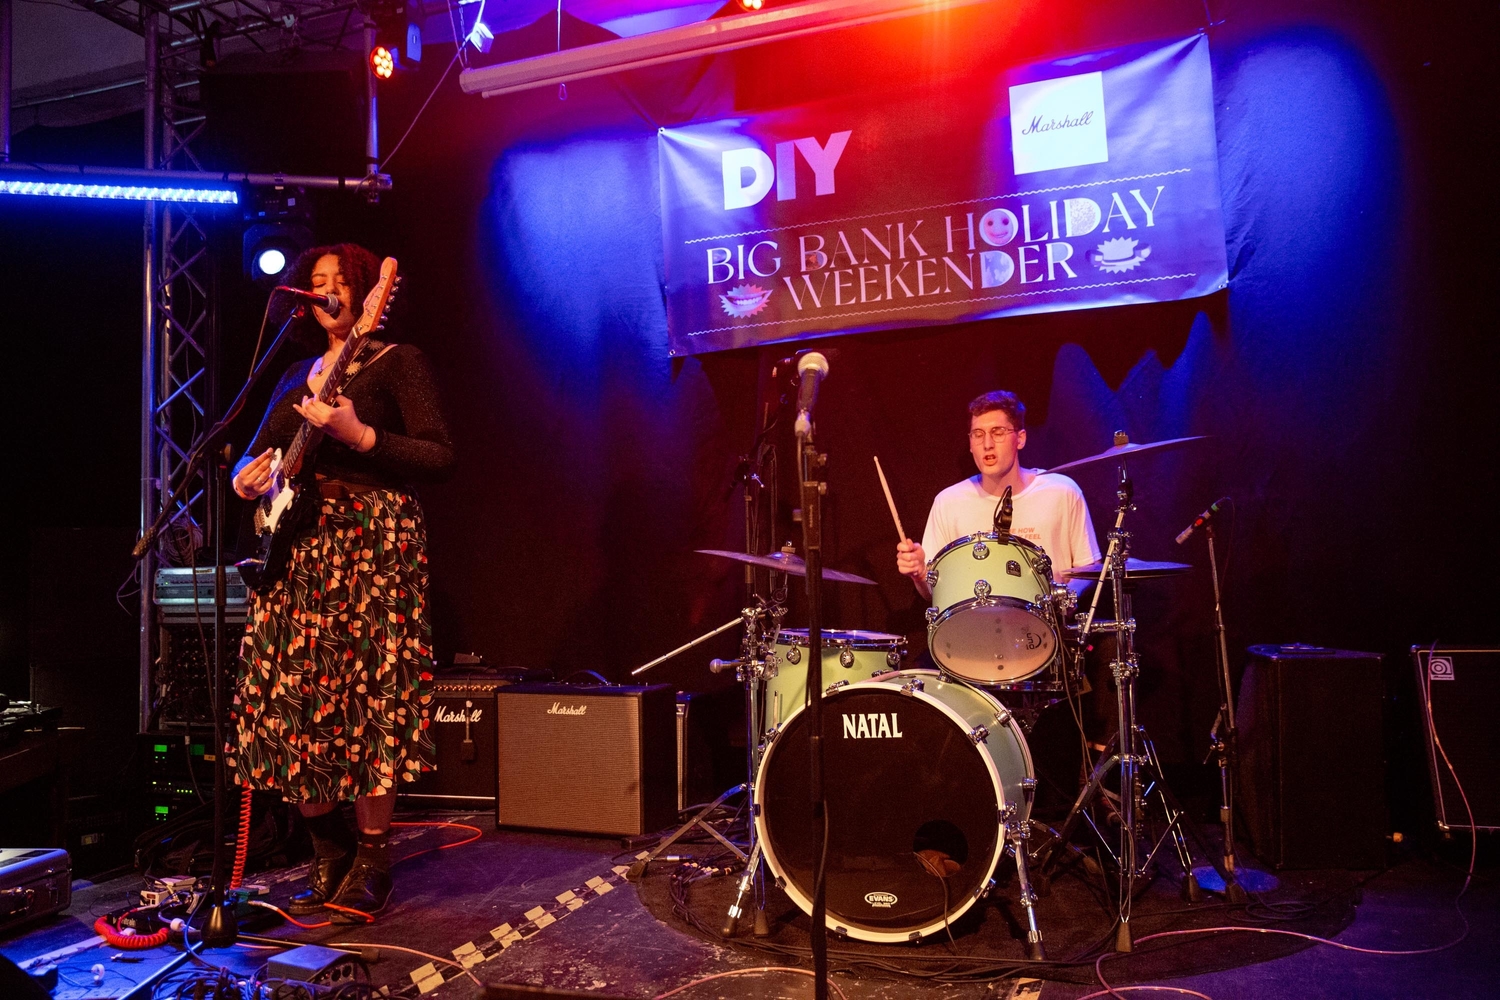 Sorry, Goat Girl, Connie Constance and more set Hackney ablaze at DIY’s Big Bank Holiday Weekender